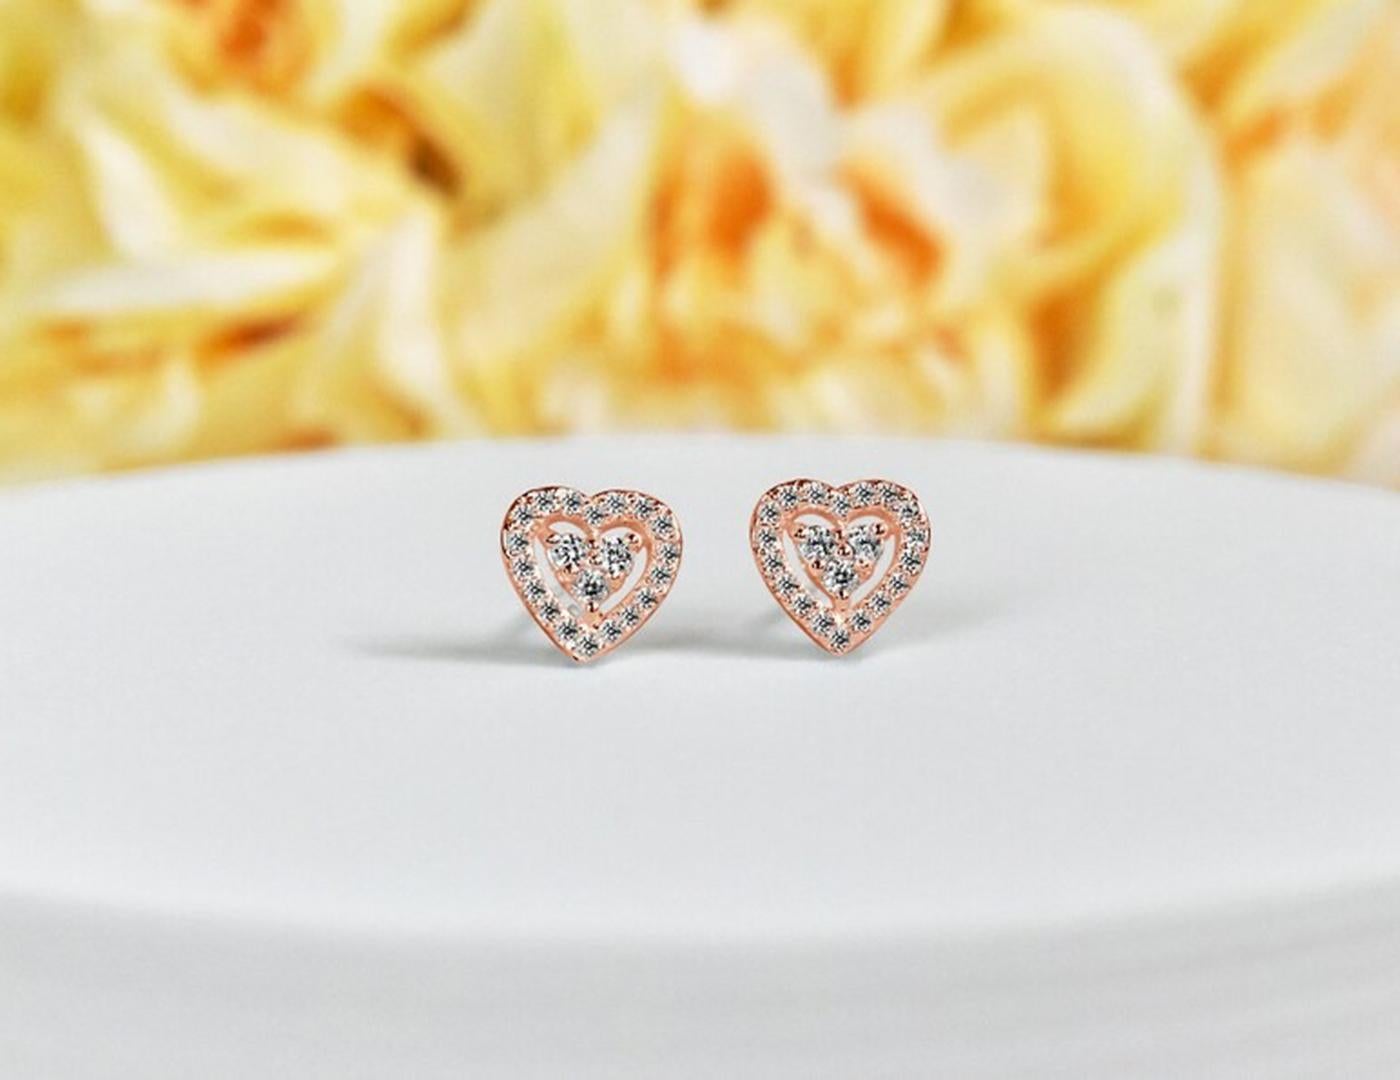 Diamond Heart Stud Earrings in 14k Rose Gold, Yellow Gold, White Gold.

These Dainty Stud Earrings are made of solid 14k gold featuring shiny brilliant round cut natural diamonds set by master setter in our studio. Simple but unique, elegant and